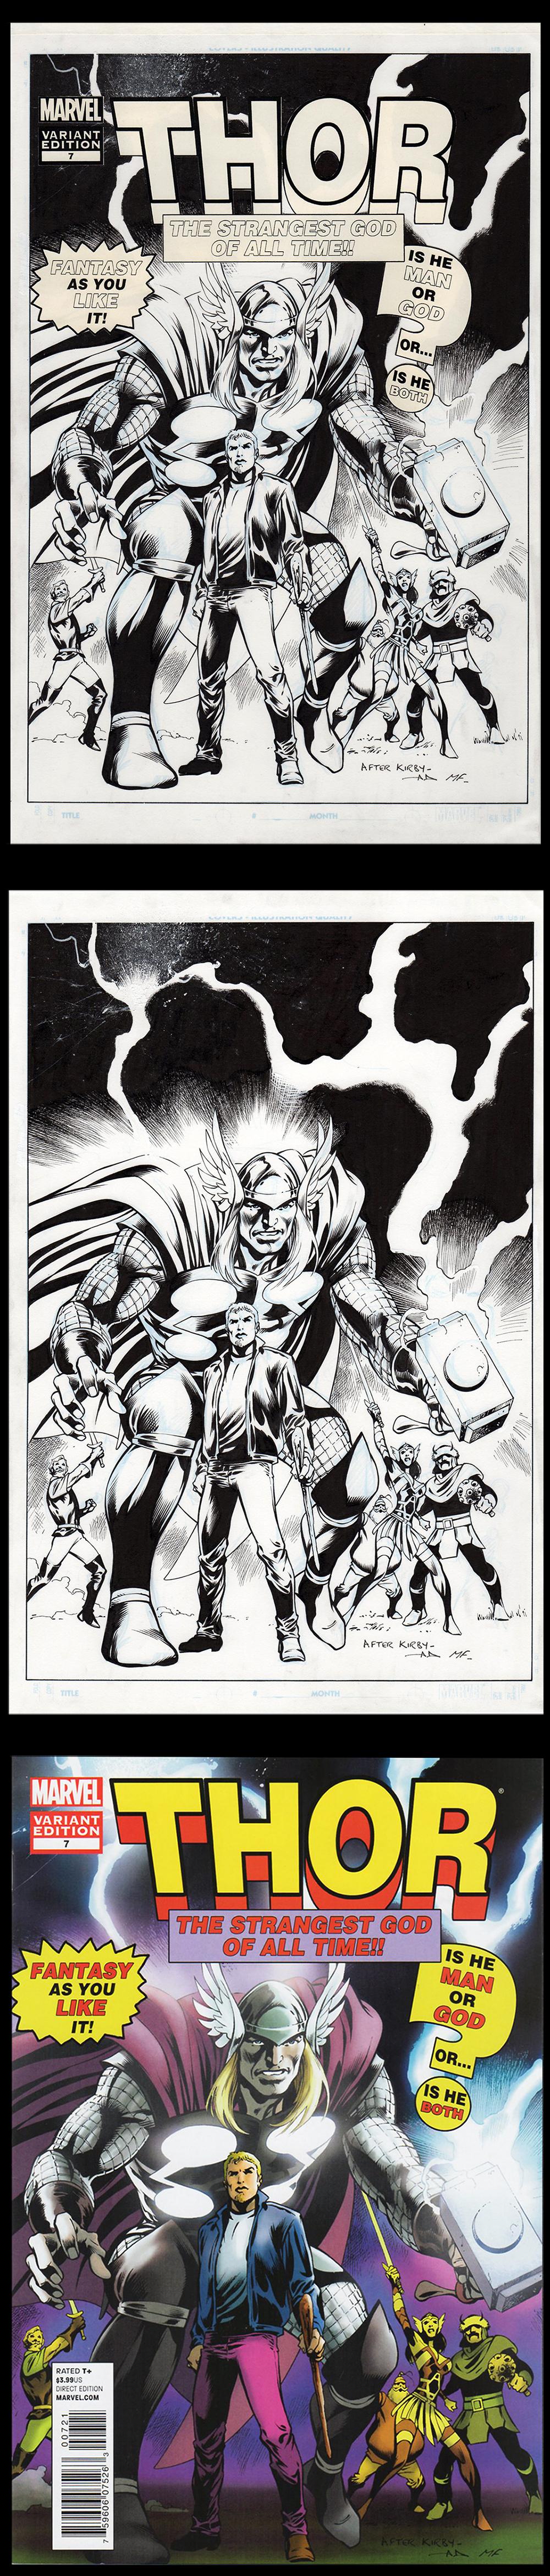 Image: Mighty Thor #7 Cover Art by Alan Davis